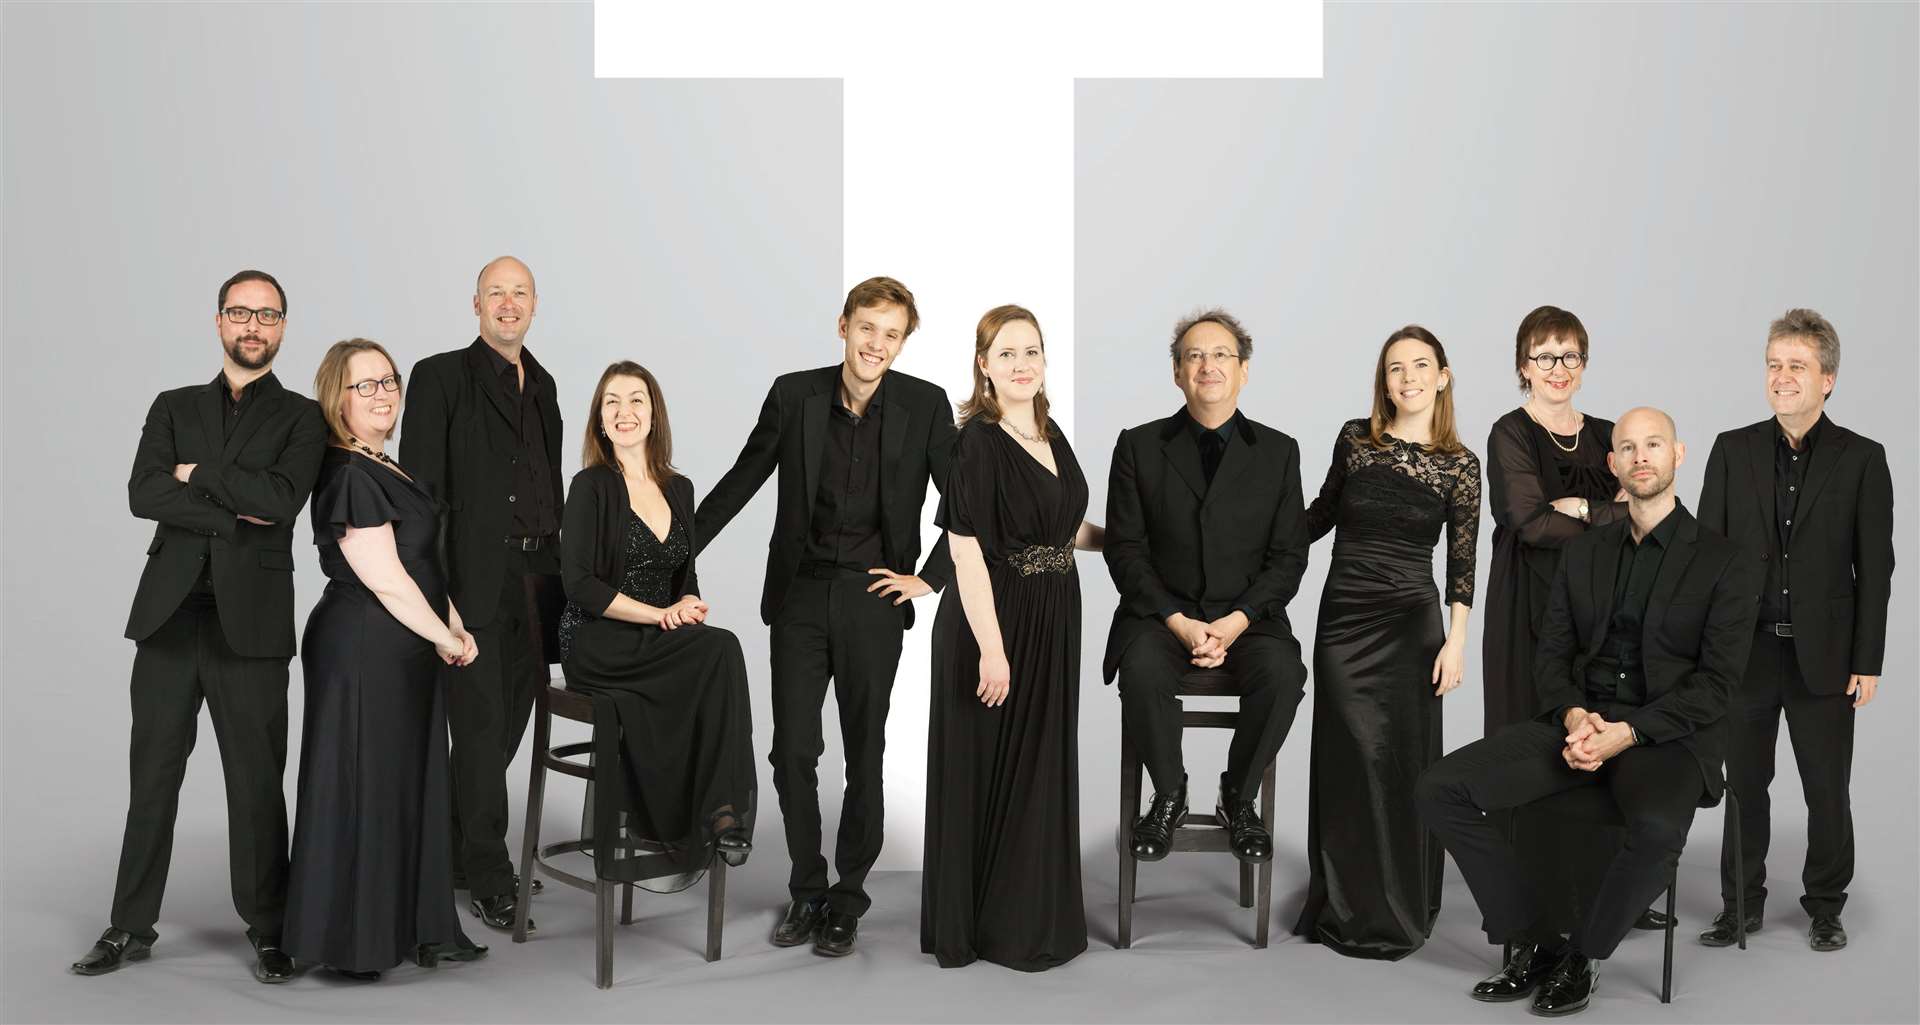 The Canterbury Festival will welcome celebrated vocal ensemble the Tallis Scholars